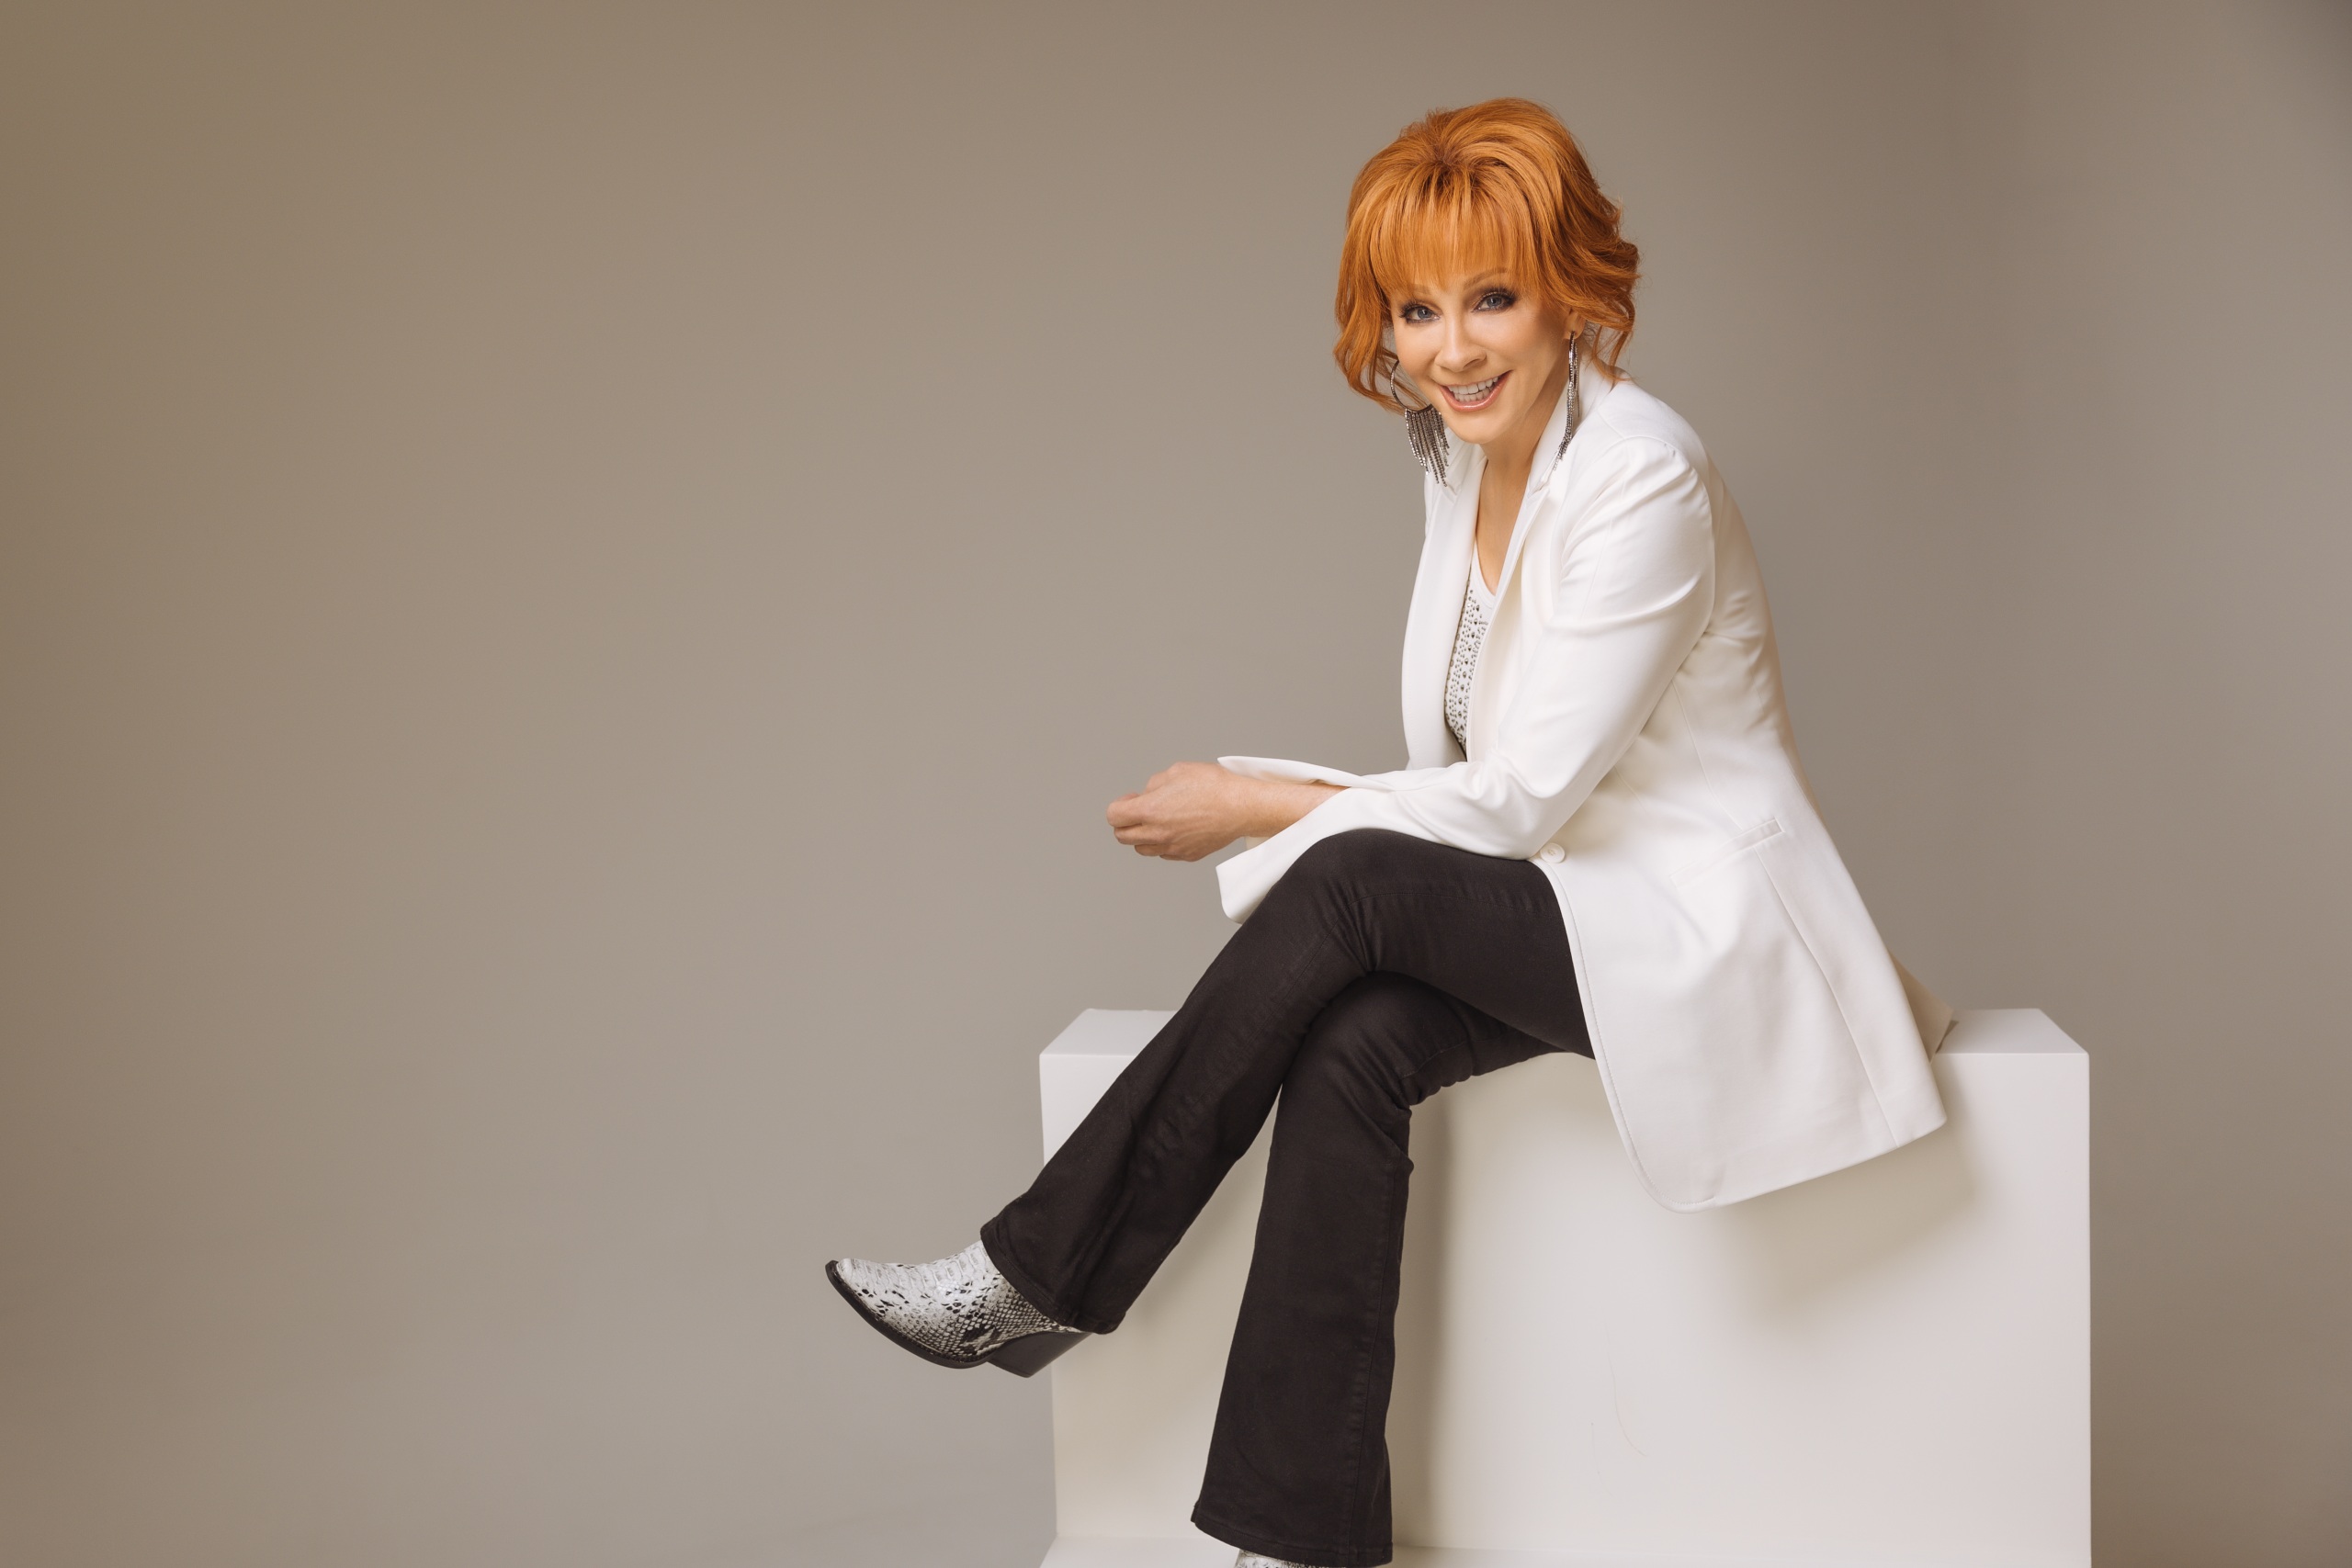 REBA MCENTIRE TO HOST THE 59TH ACADEMY OF COUNTRY MUSIC AWARDS.